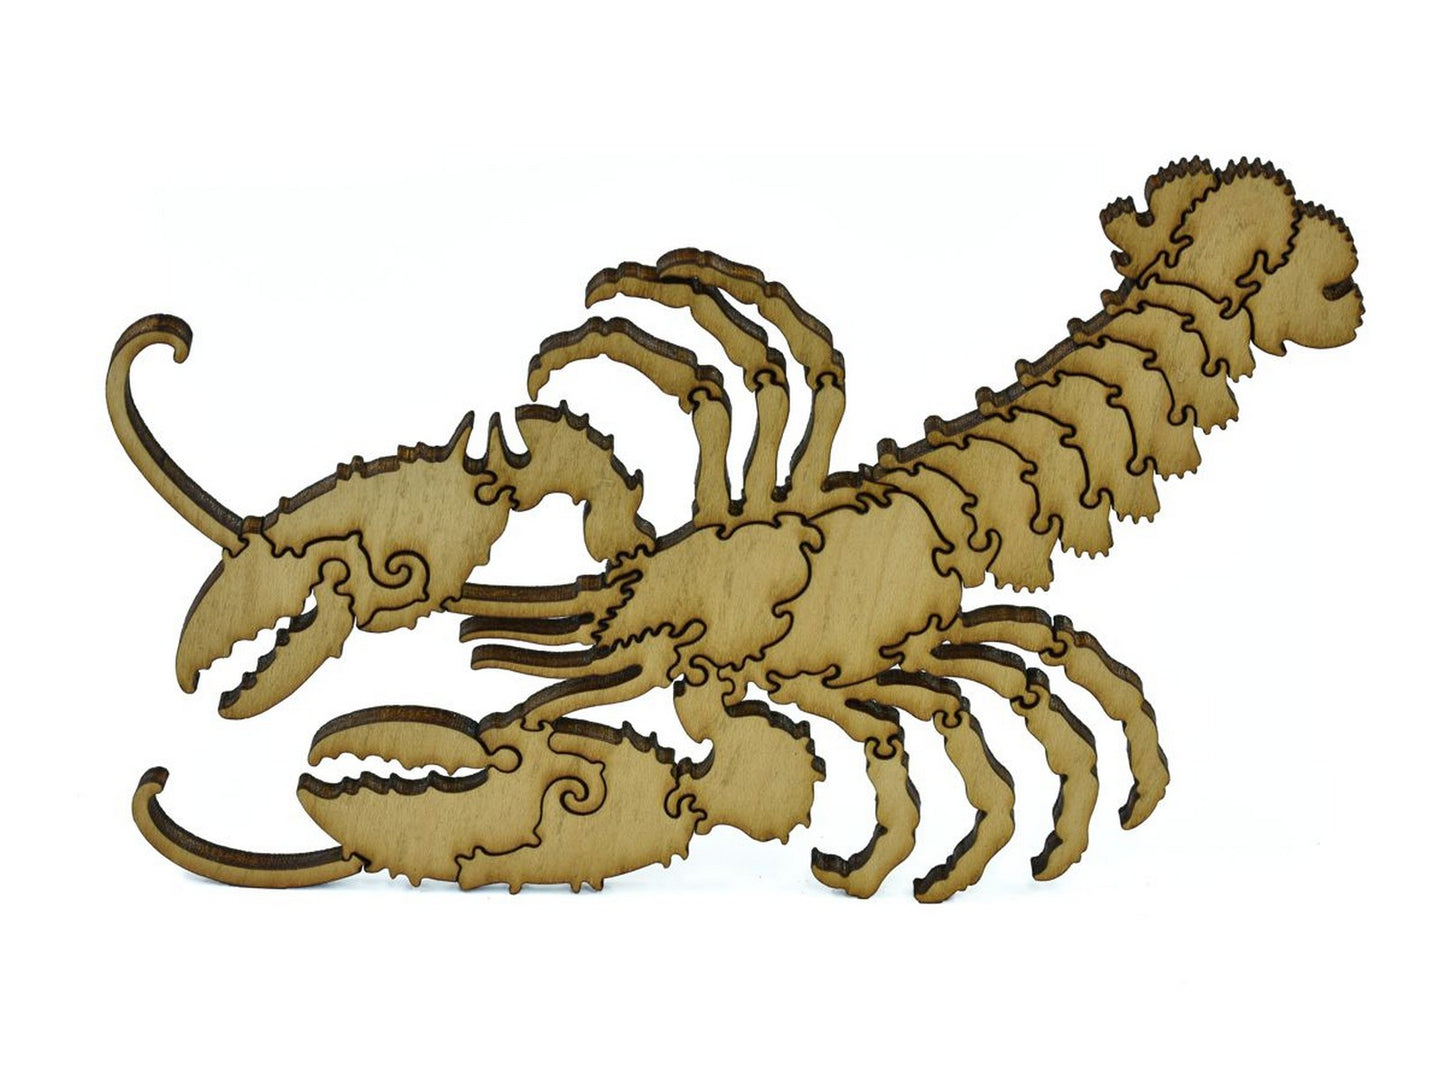 A closeup of pieces in the shape of a large lobster.